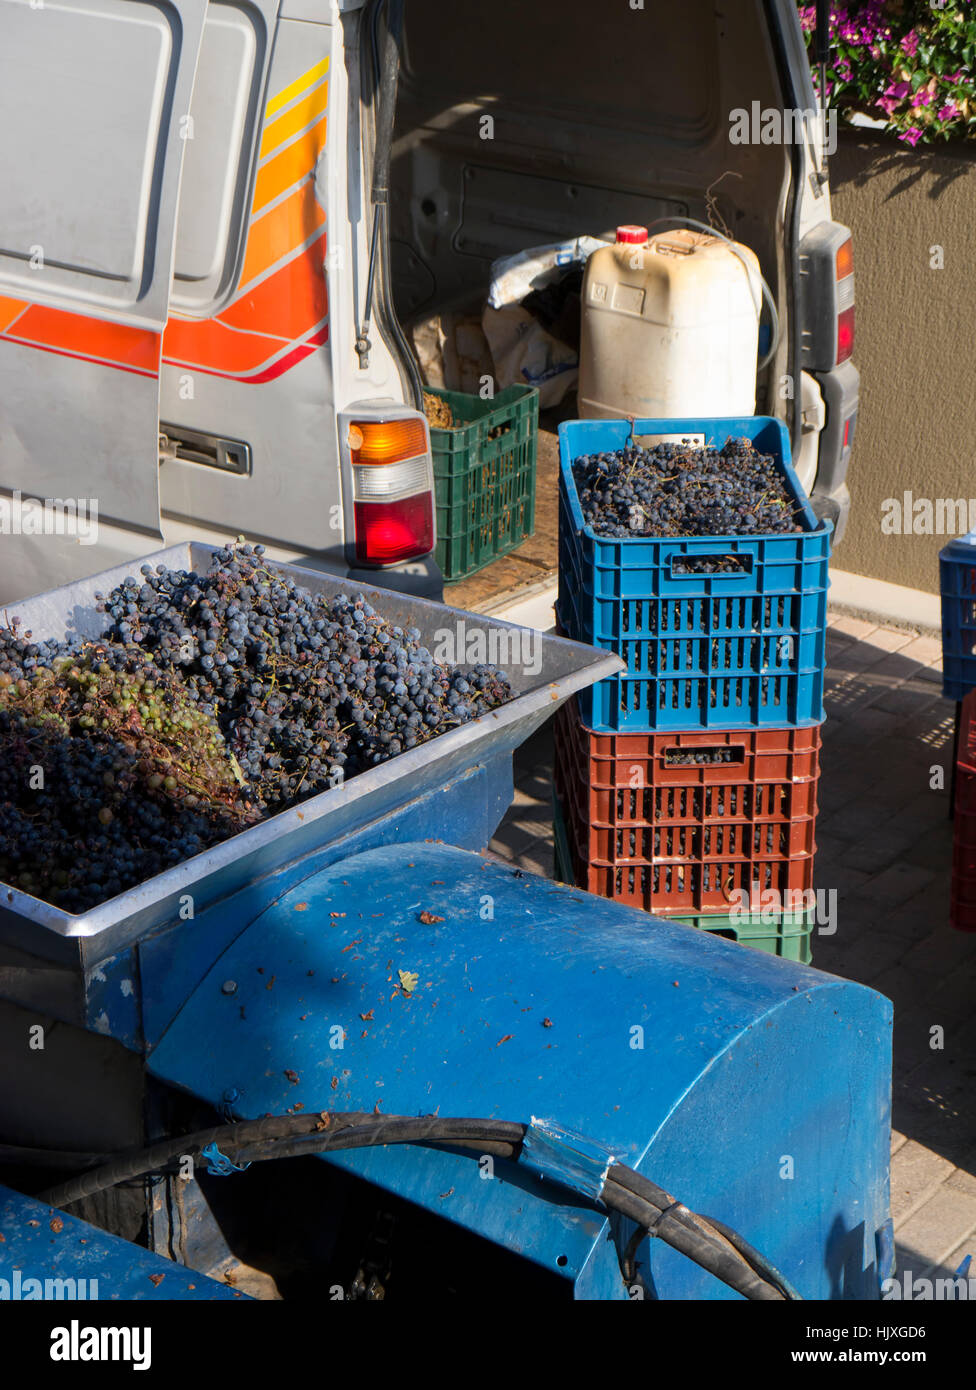 Grapes that have harvested and are being crushed ready for bottling. Stock Photo